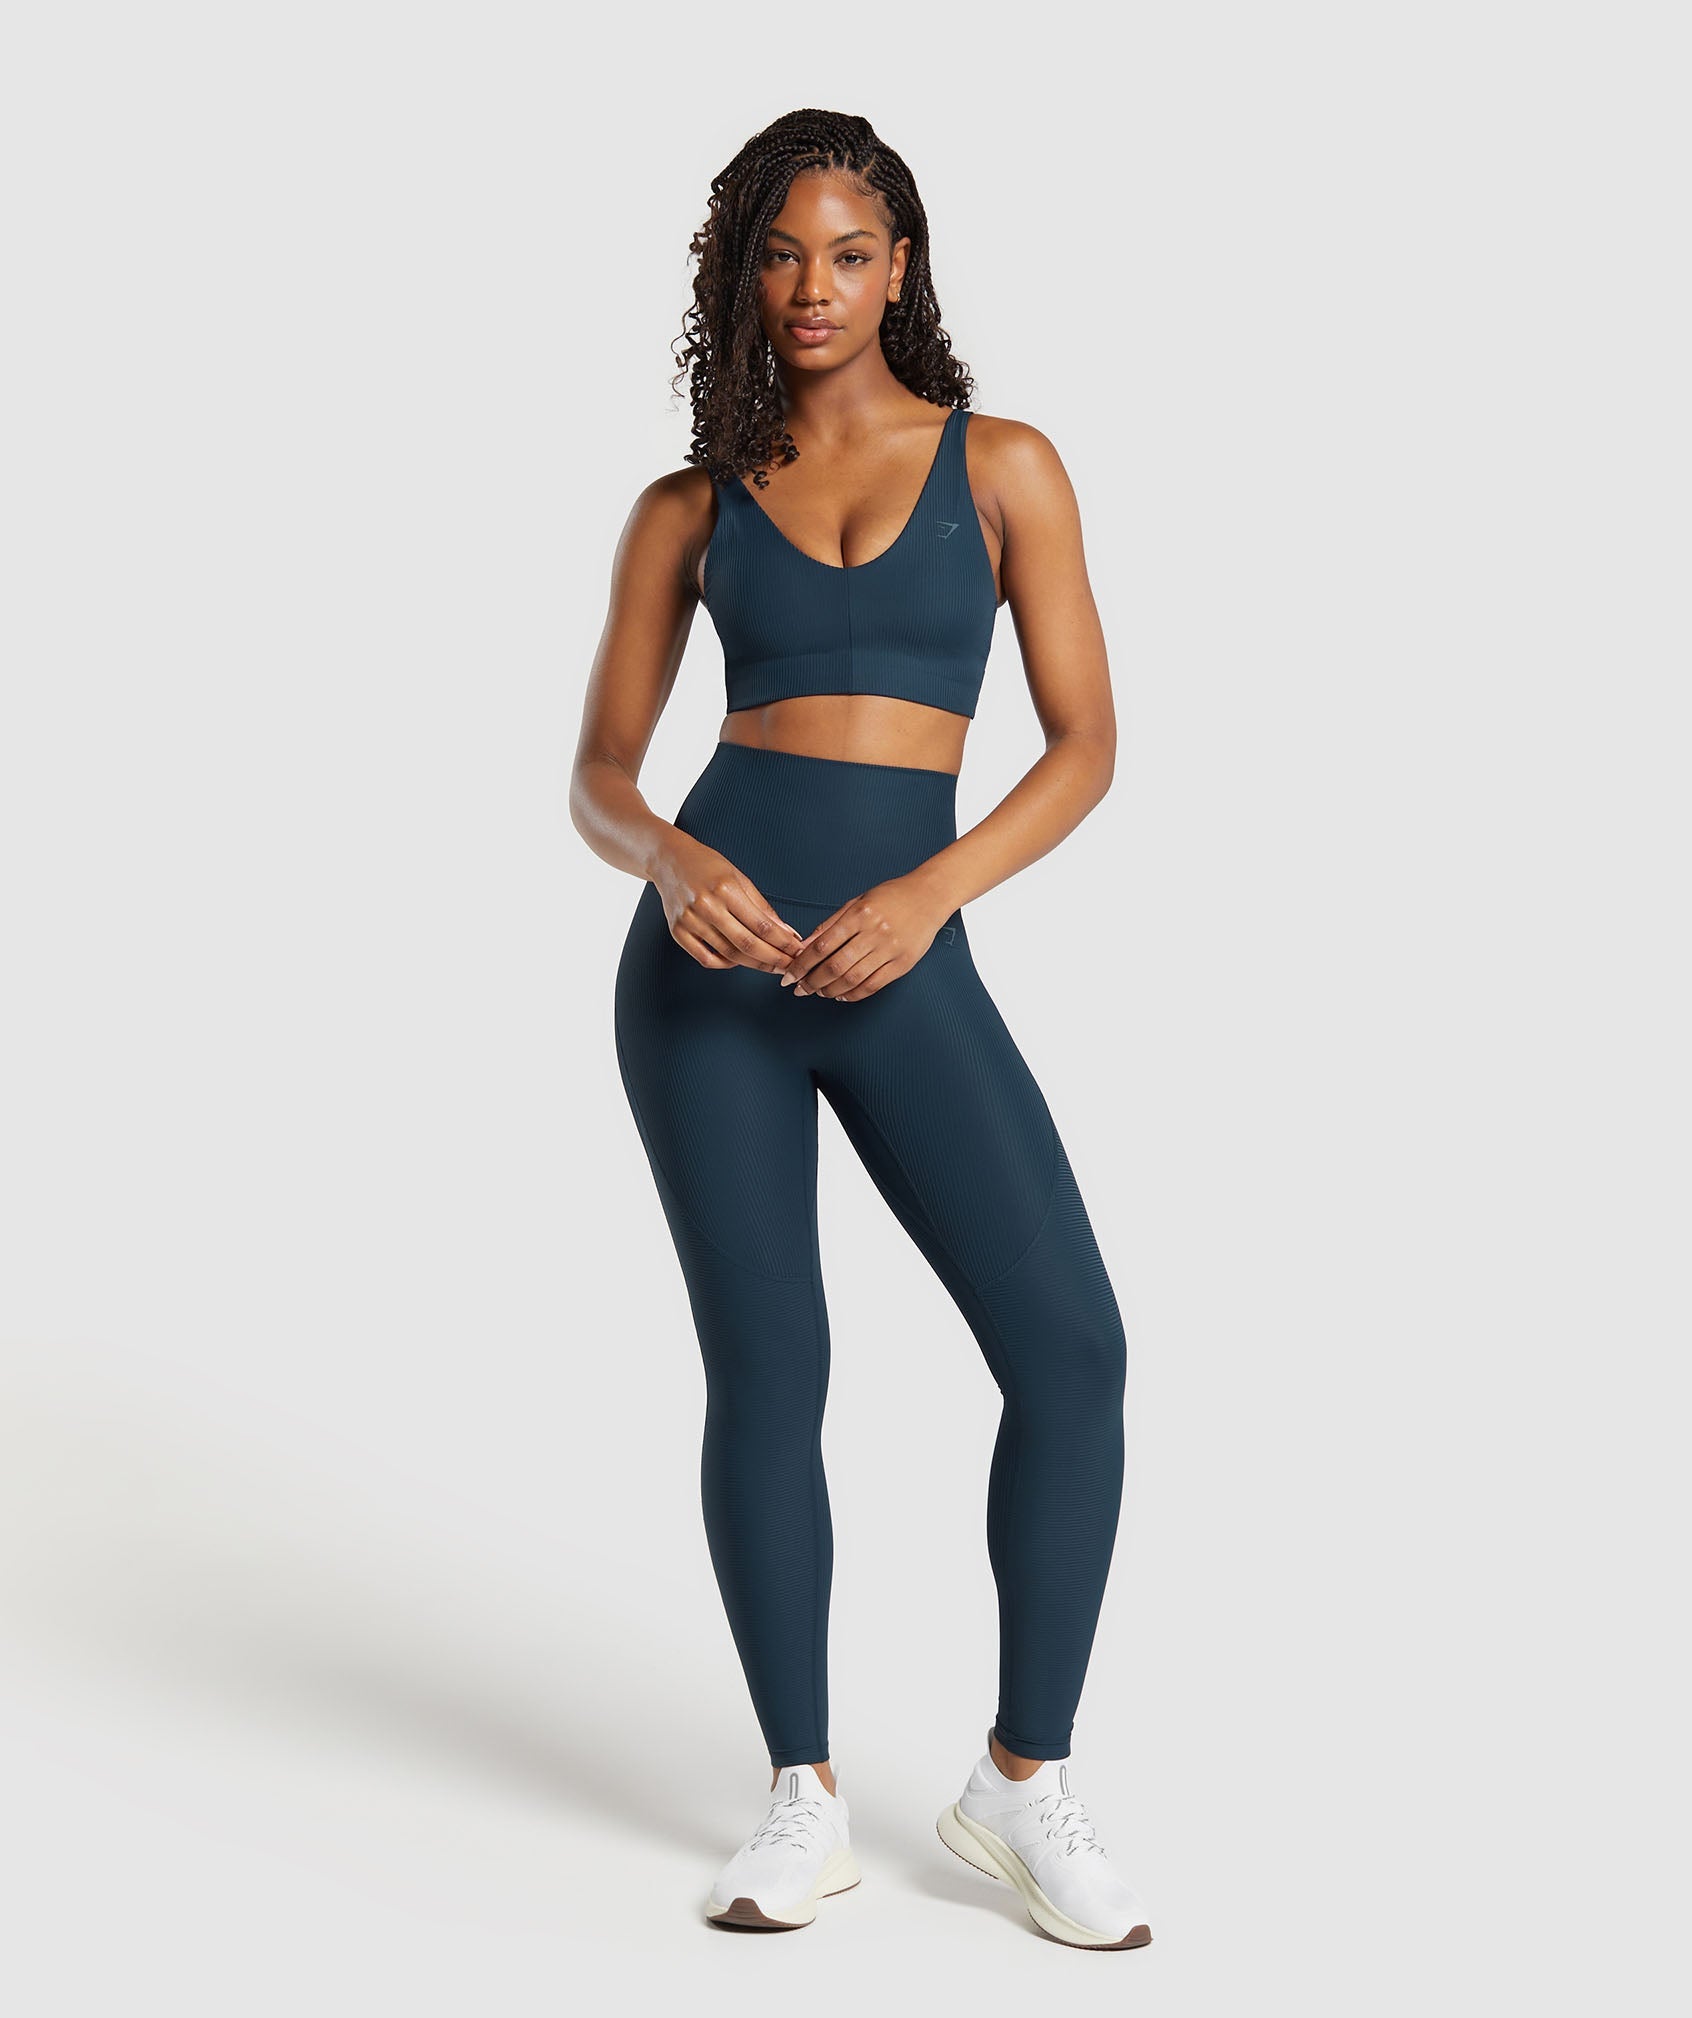 Ribbed Sports Bra in Navy - view 4